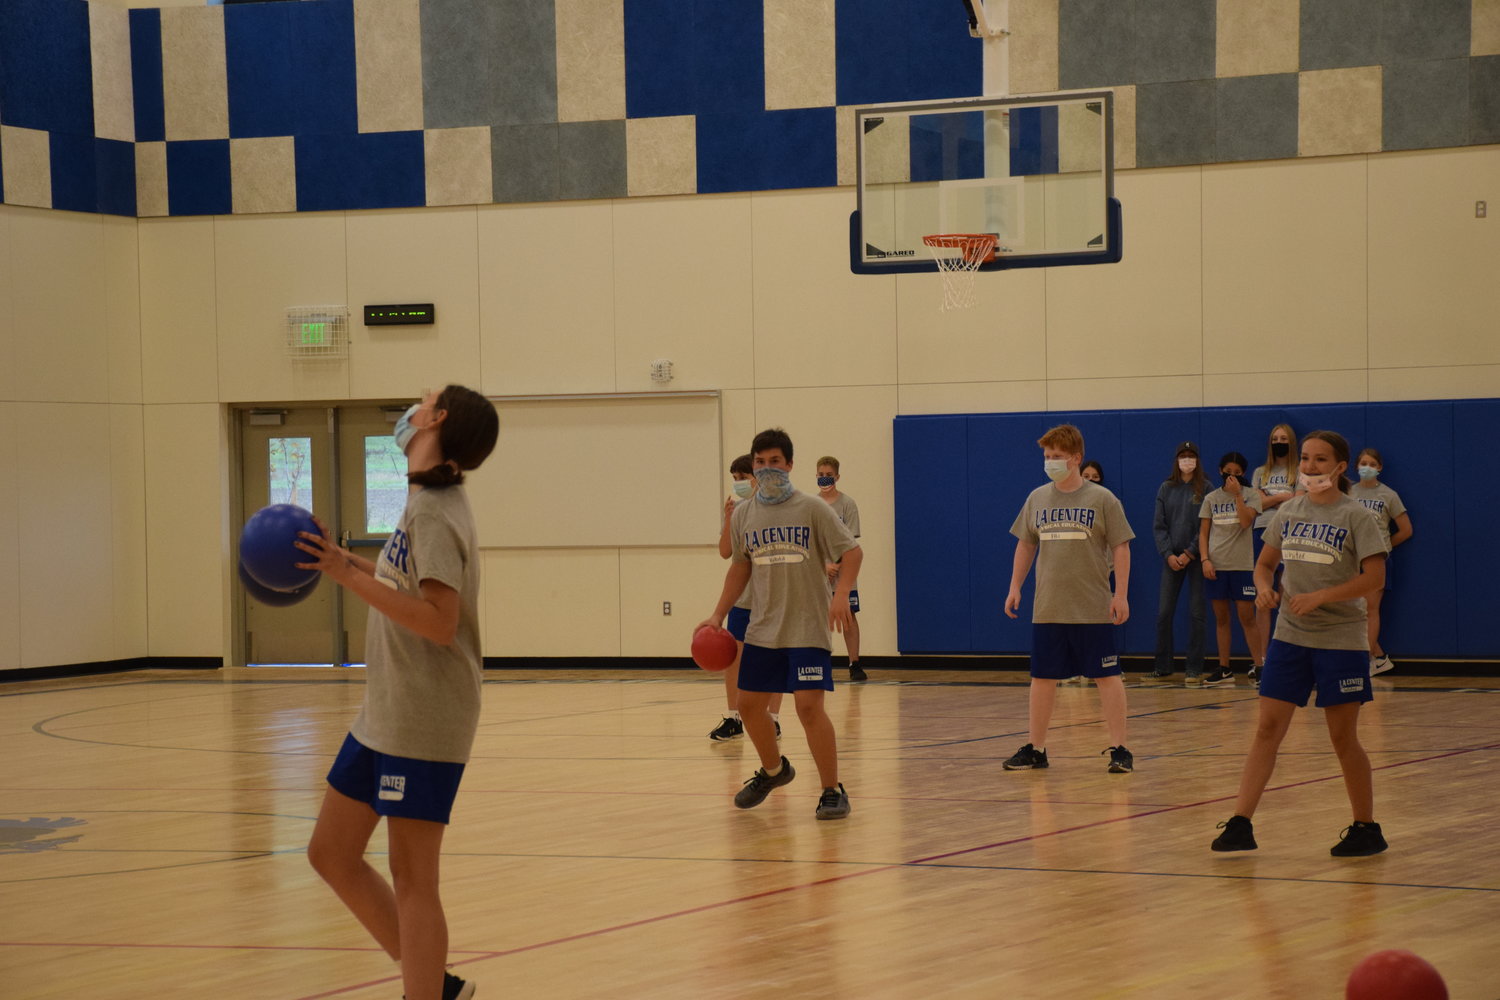 La Center Middle School students take part in dodgeball in the new school building’s large gym on Oct. 14.